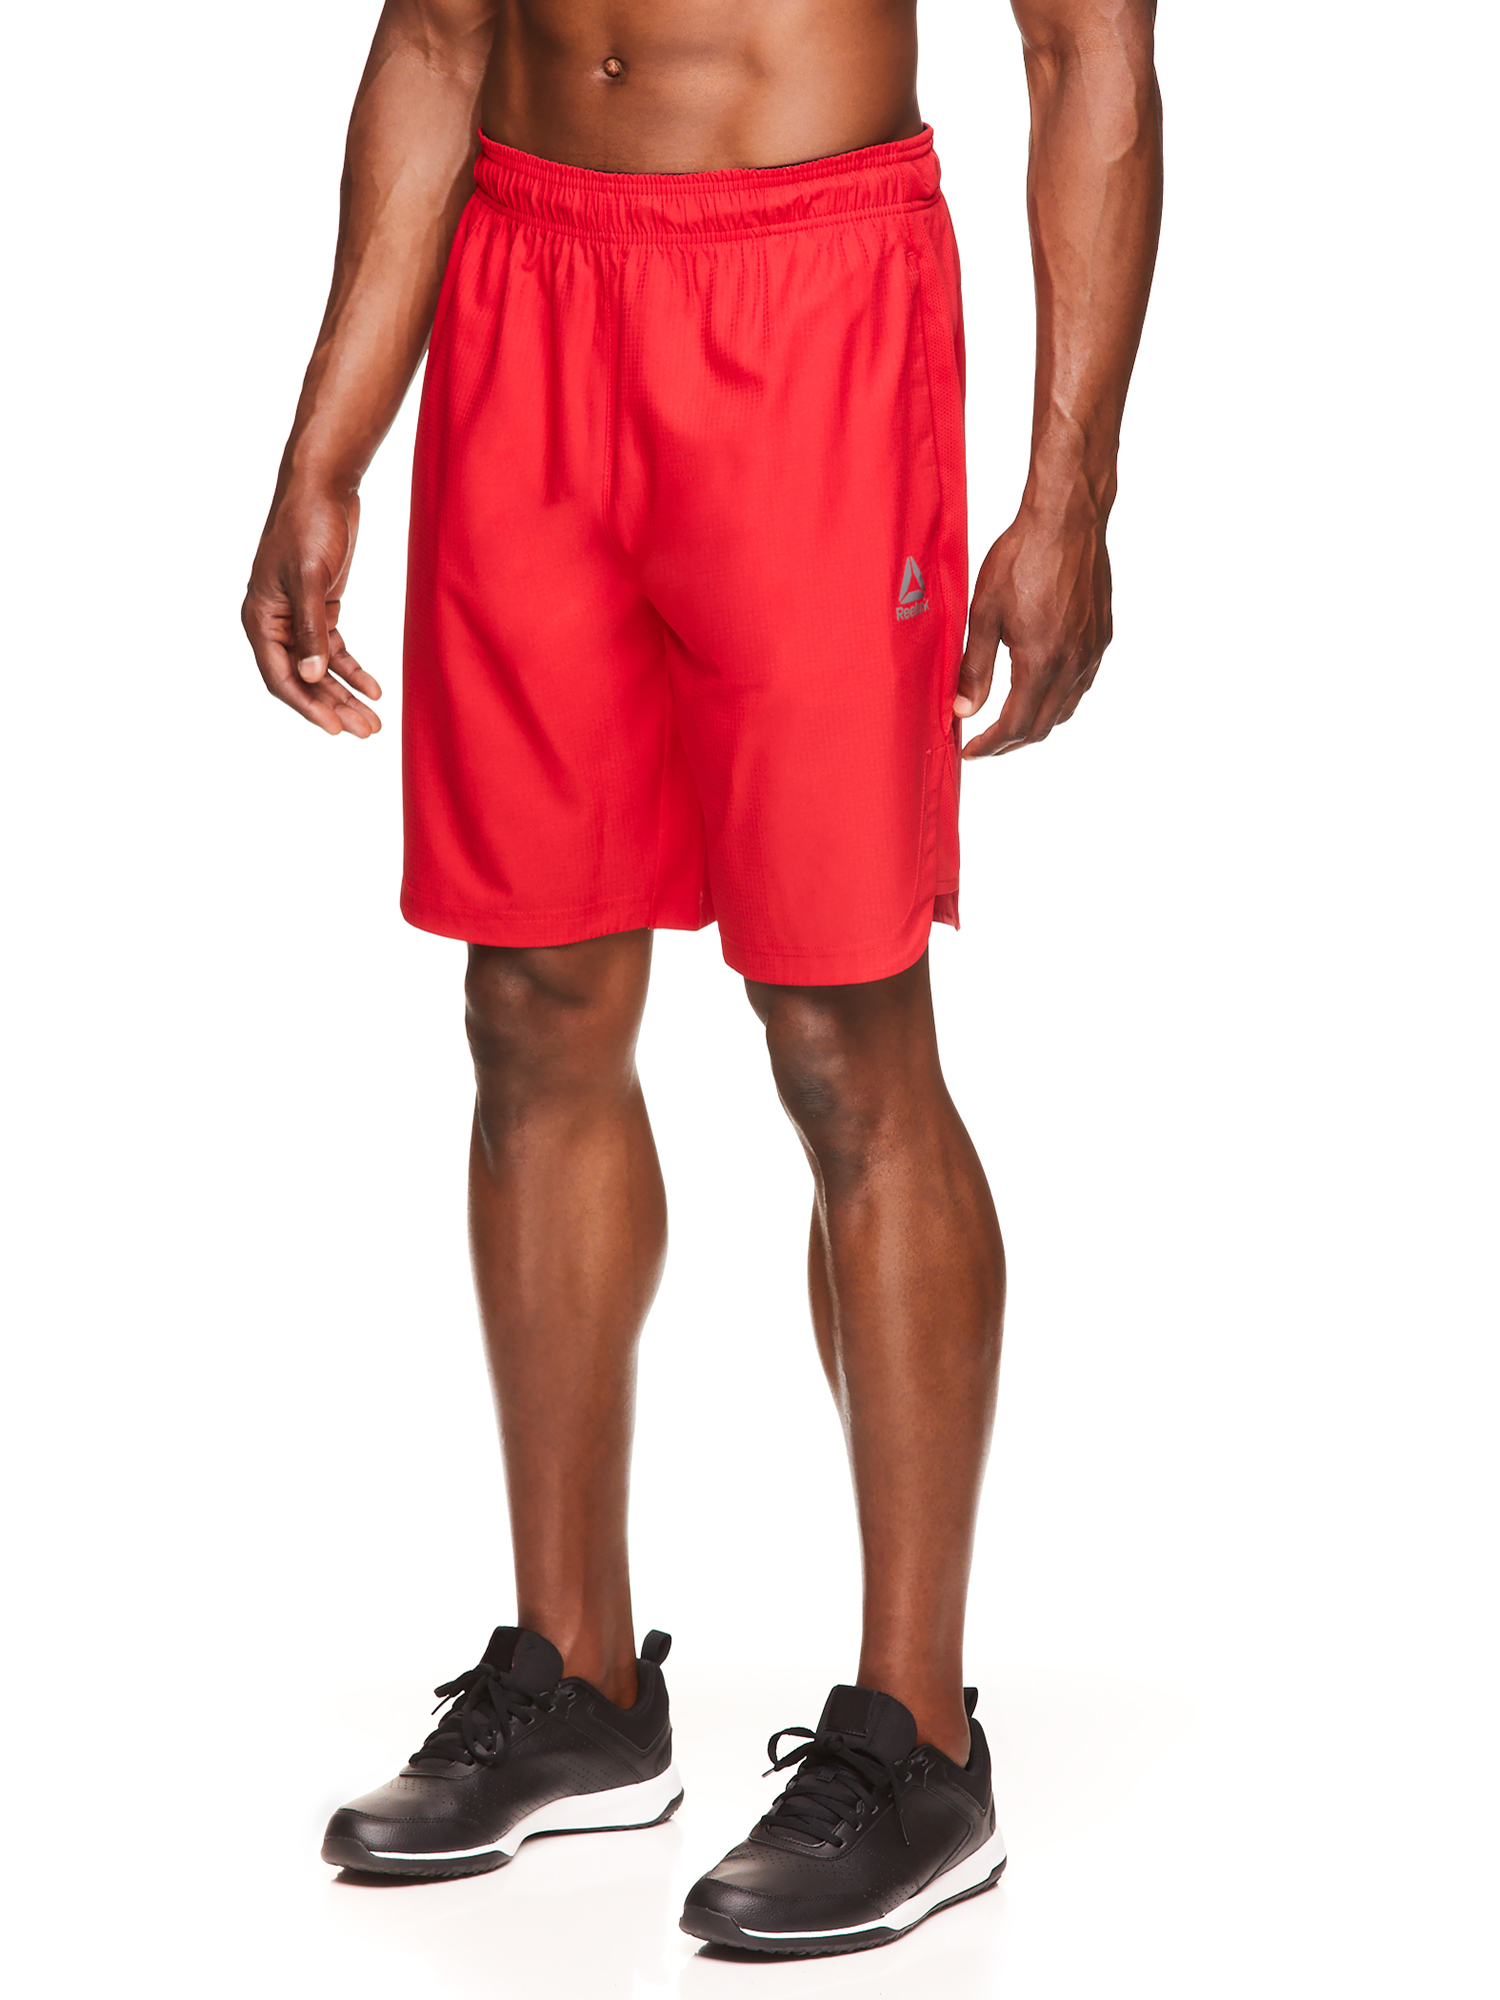 Reebok Men's and Big Men's Active Textured Woven Shorts, 9" Inseam, up to Size 3XL - image 3 of 4